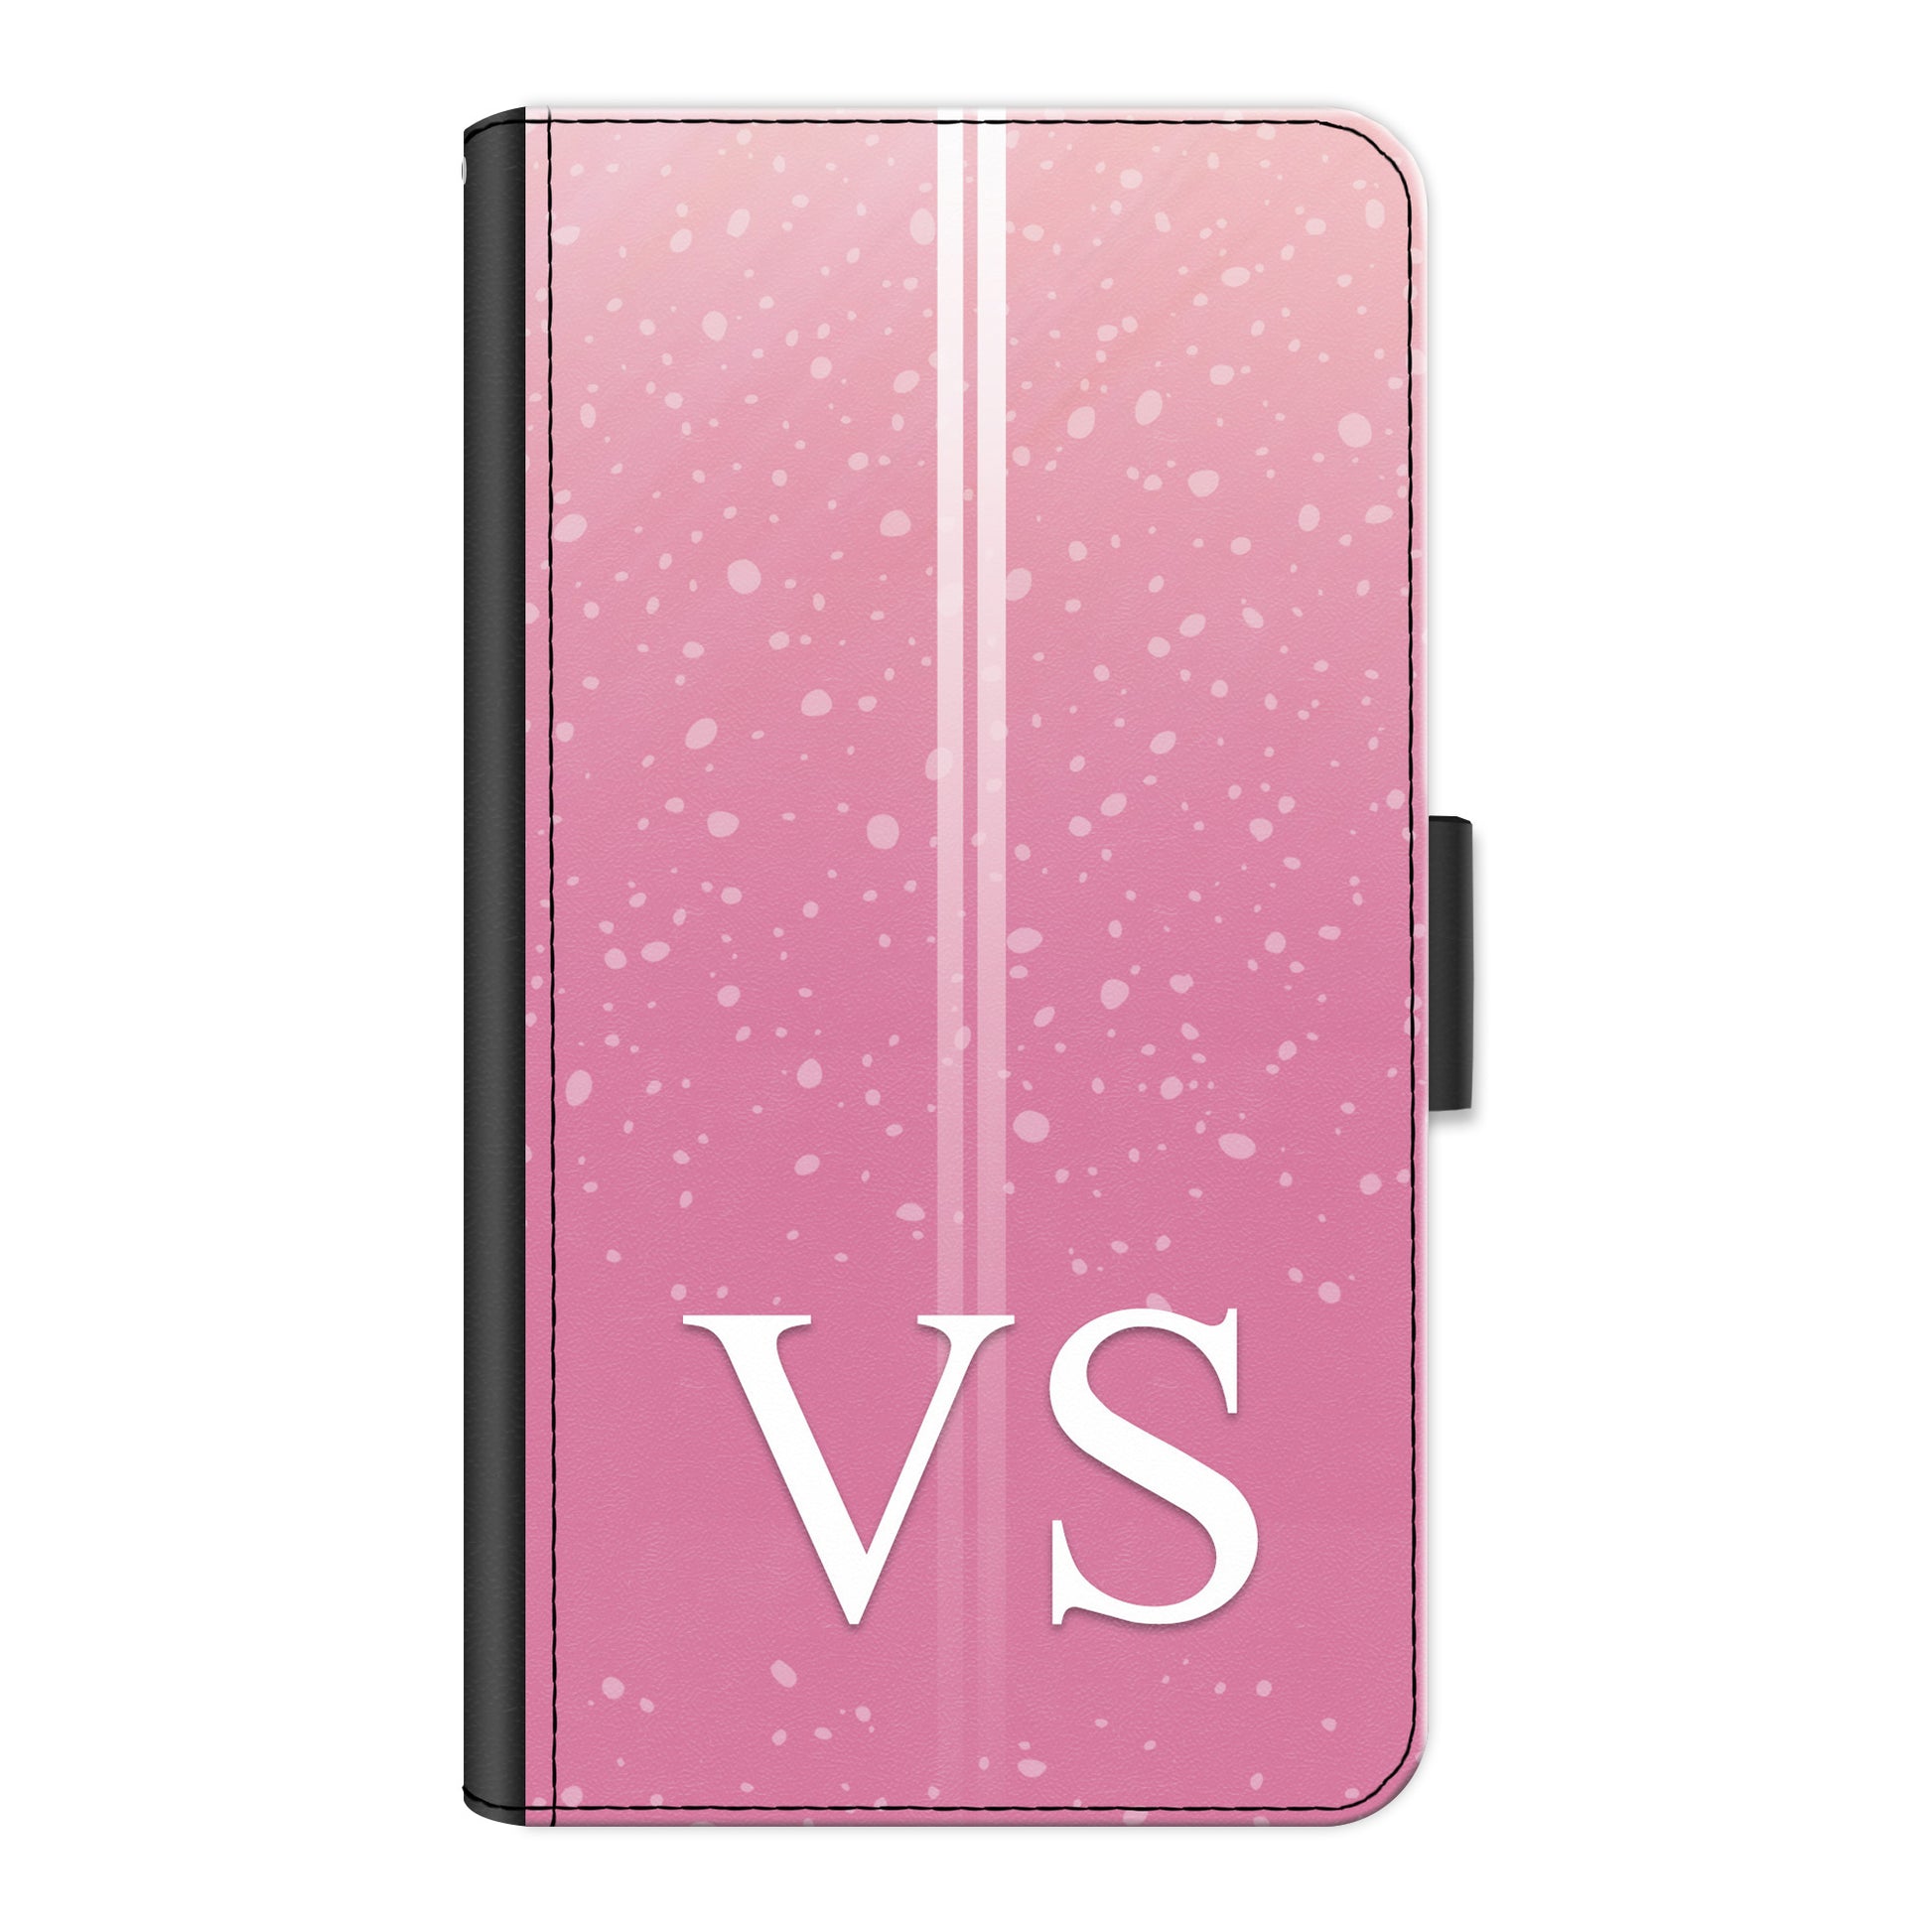 Personalised Huawei Phone Leather Wallet with White Initials, Pin Stripes and Droplets on Pink